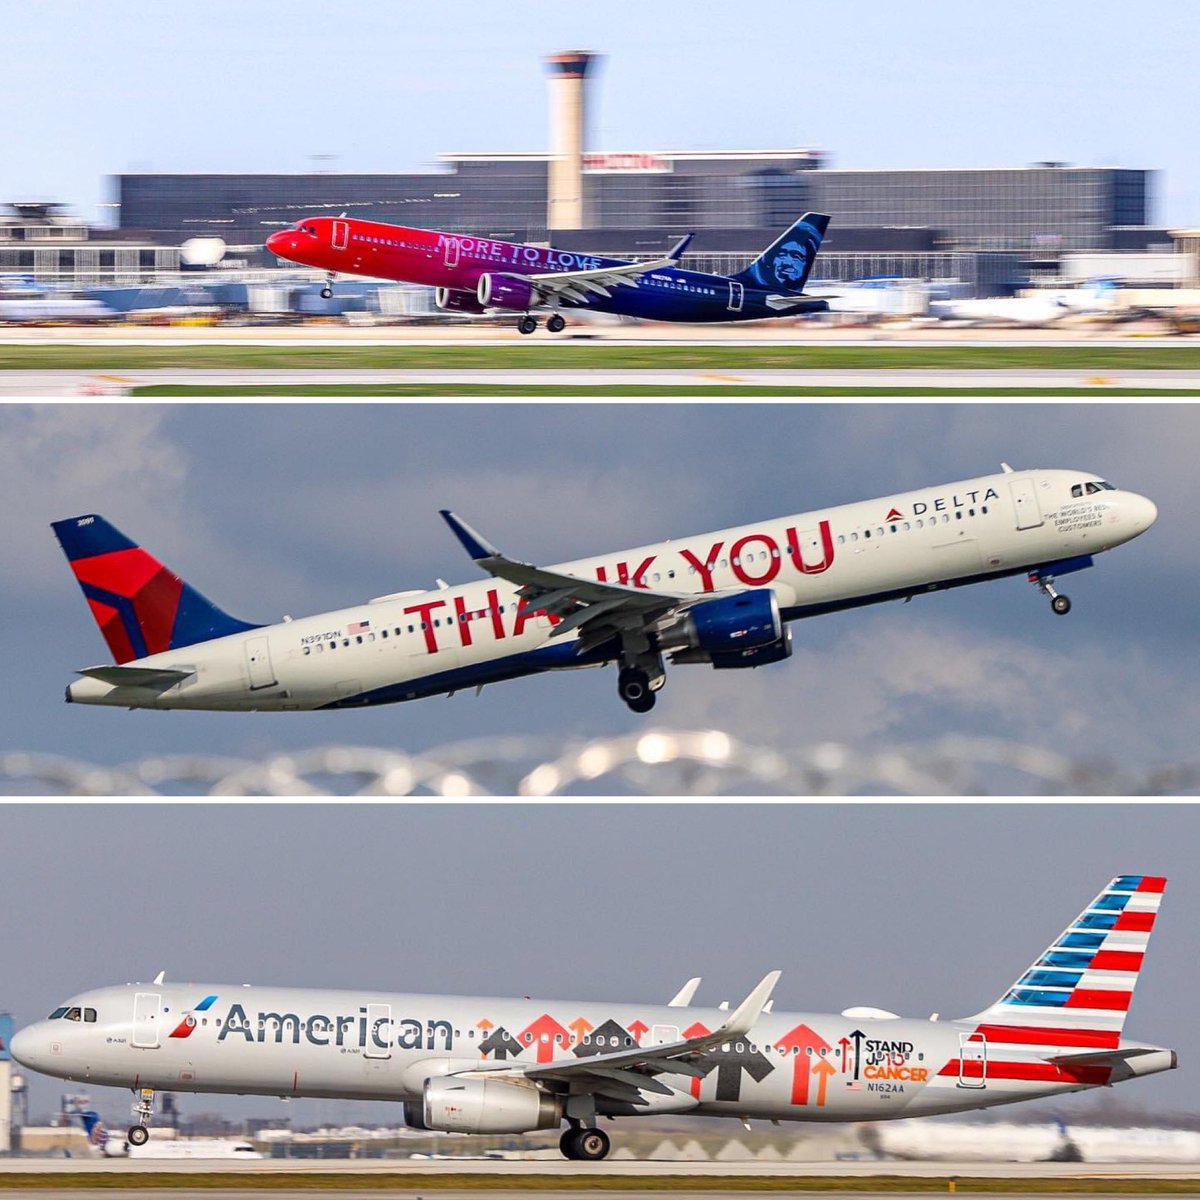 Today is 3/21 so it is 321 day. Here are a few 321’s I’ve seen. #chooseohare  #chicago #aviation #aviationdaily #aviatornation #avgeek #avgeeks  #planespotting #planespotters #planespotter #ordairportwatch #planephotos #planepictures @fly2ohare